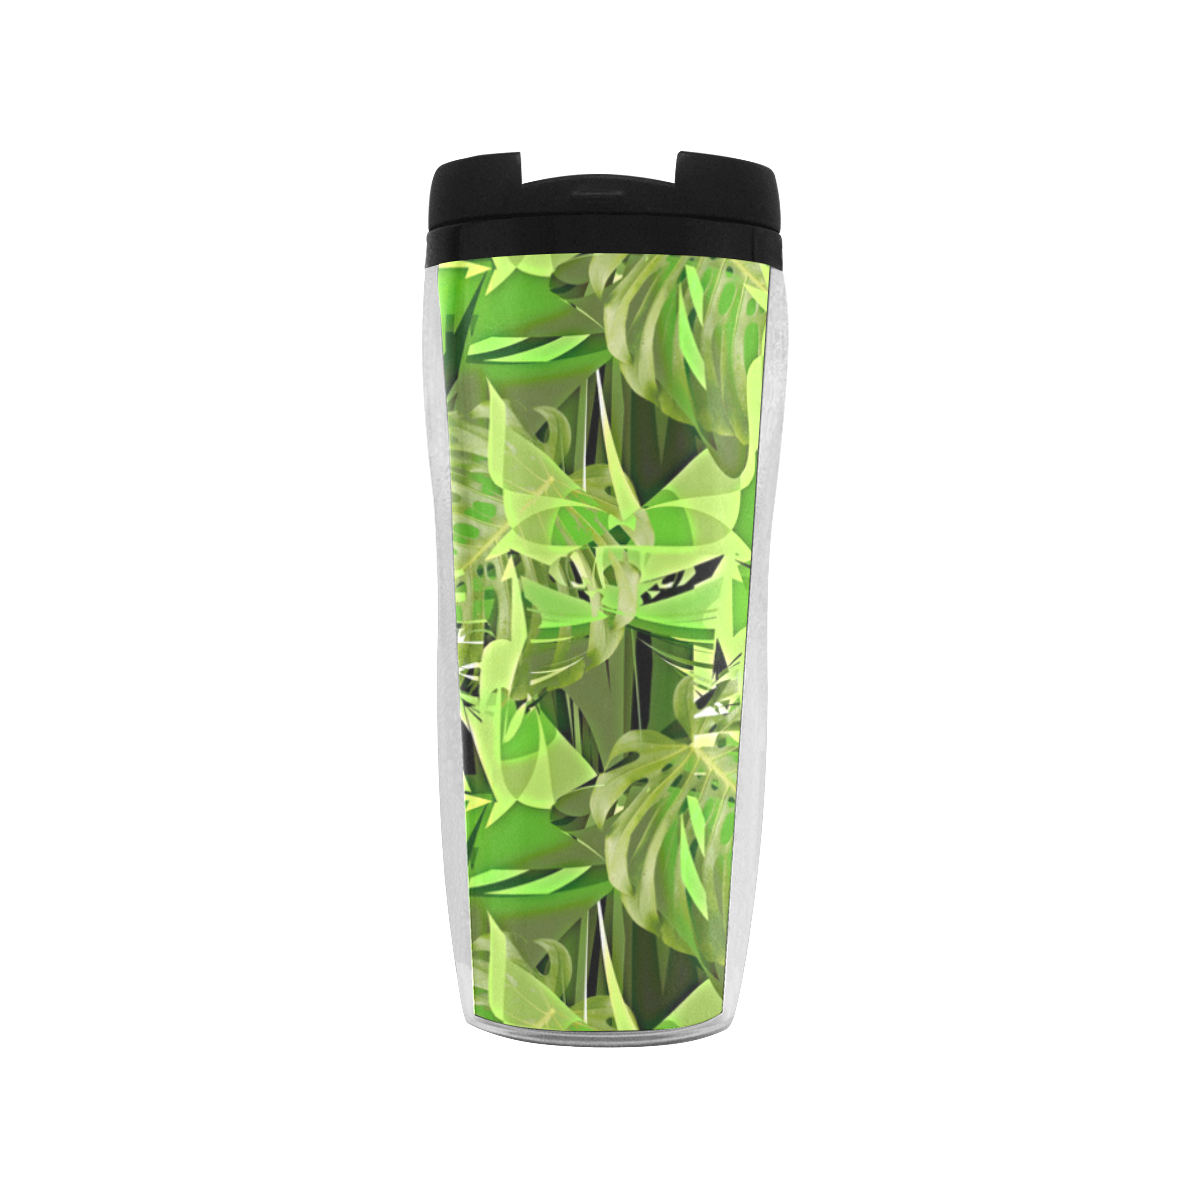 Tropical Jungle Leaves Camouflage Reusable Coffee Cup (11.8oz)